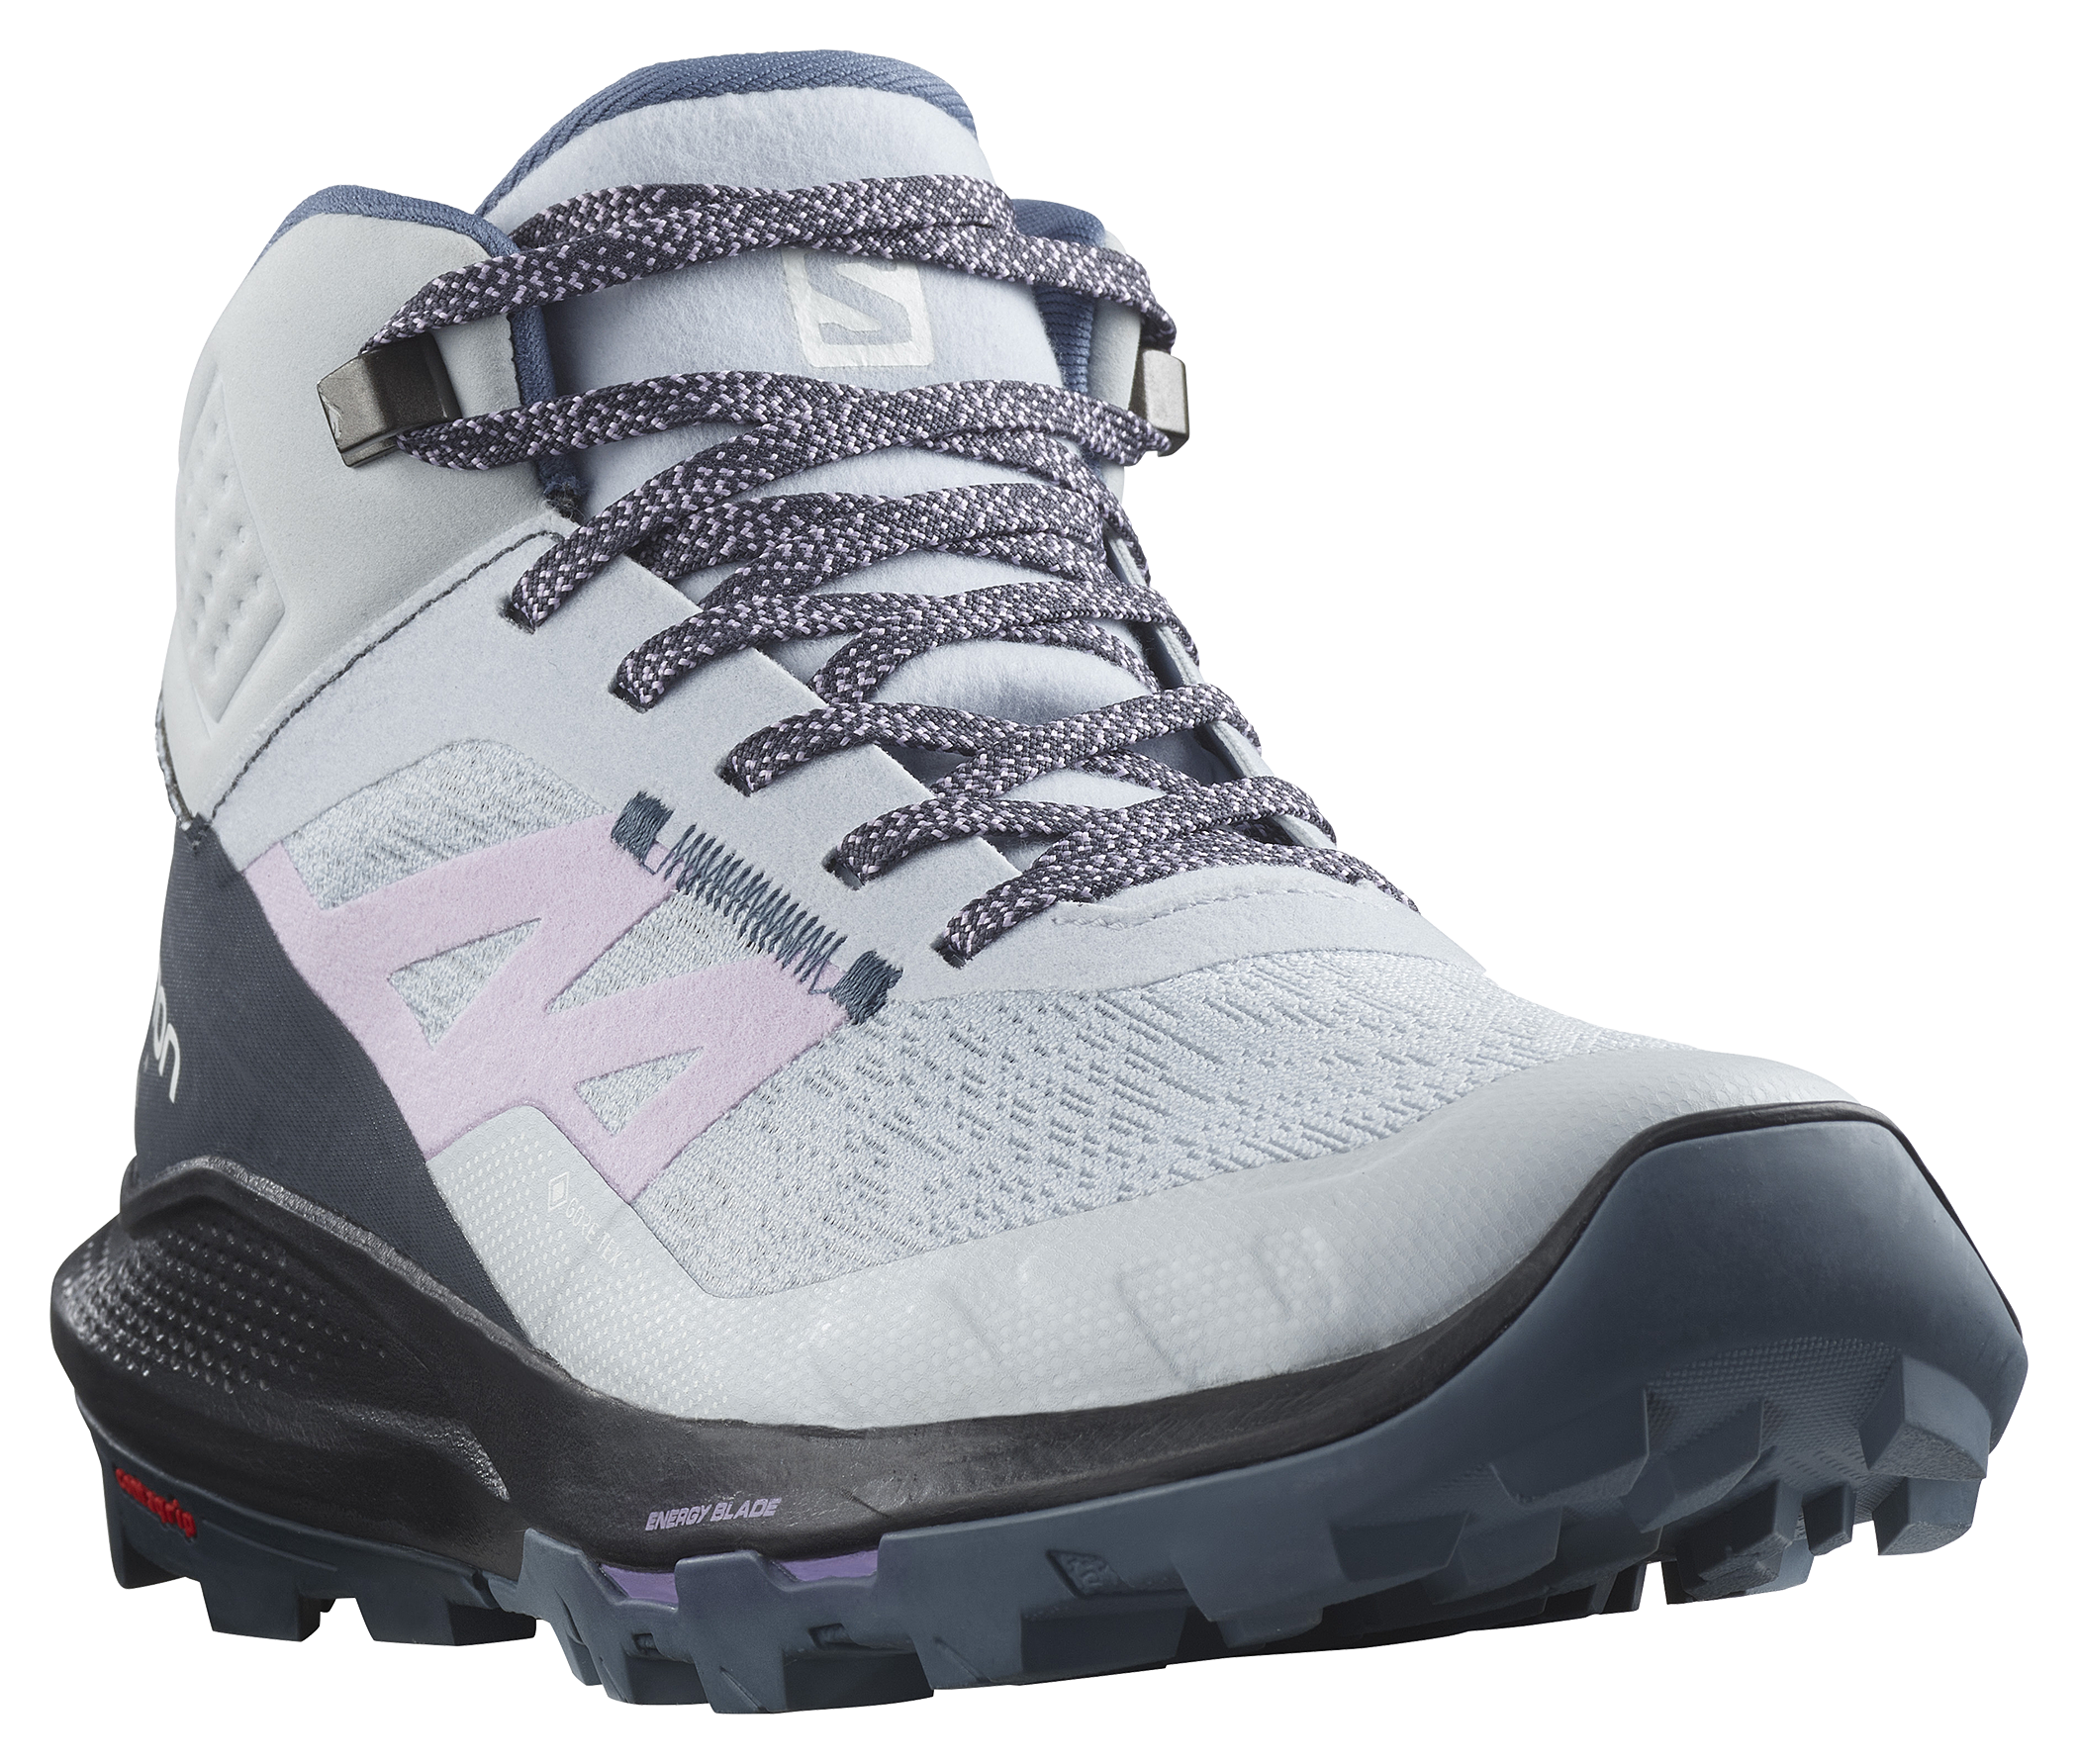 Salomon Outpulse Mid GORE-TEX Hiking Boots for Ladies - Arctic Ice/India Ink/Orchid Bloom - 6M